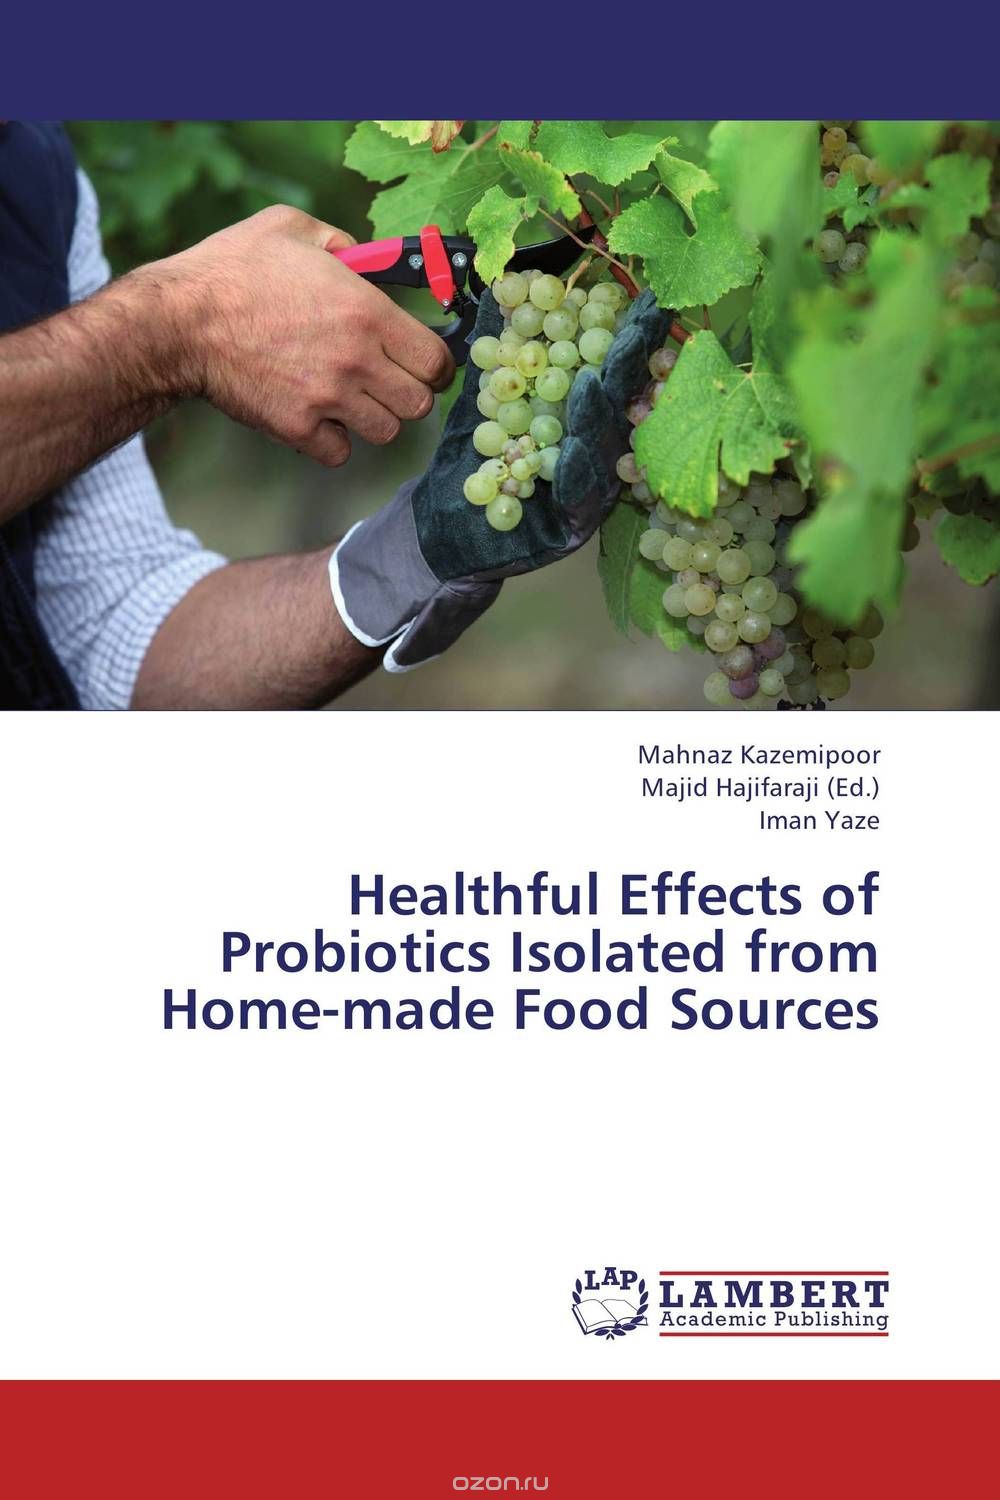 Скачать книгу "Healthful Effects of Probiotics Isolated from Home-made Food Sources"